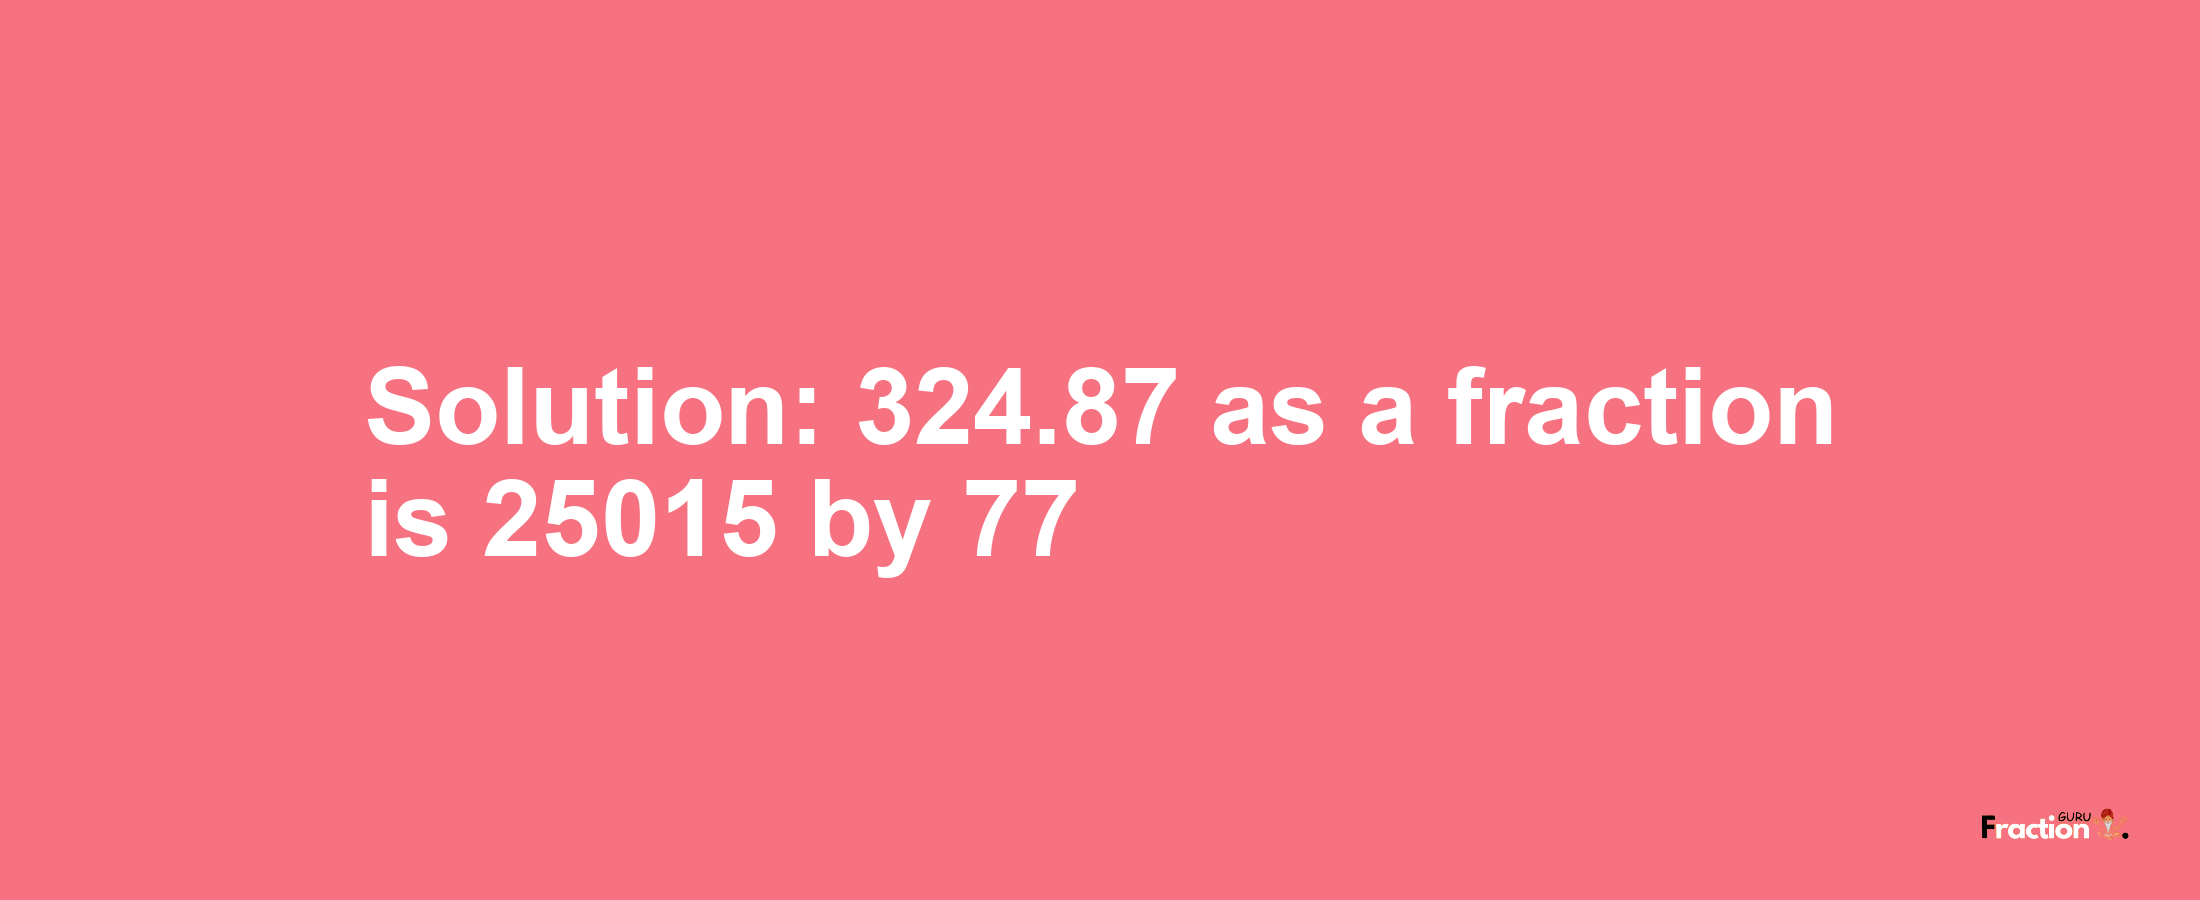 Solution:324.87 as a fraction is 25015/77